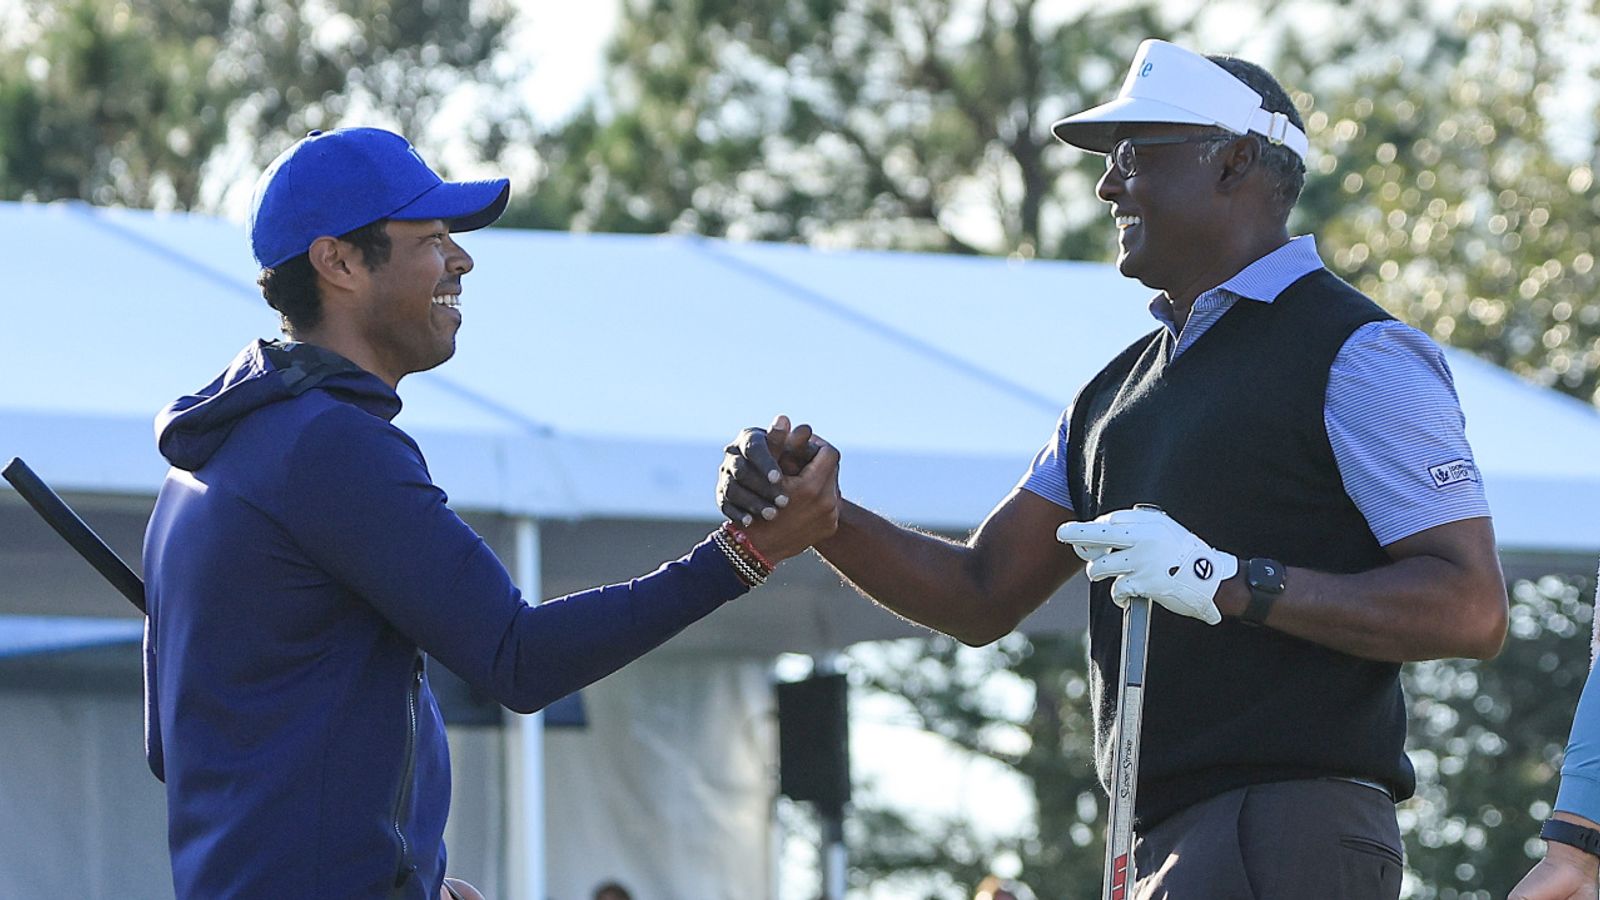 Vijay Singh and son Qass claim PNC Championship title | Tiger Woods: An incredible week